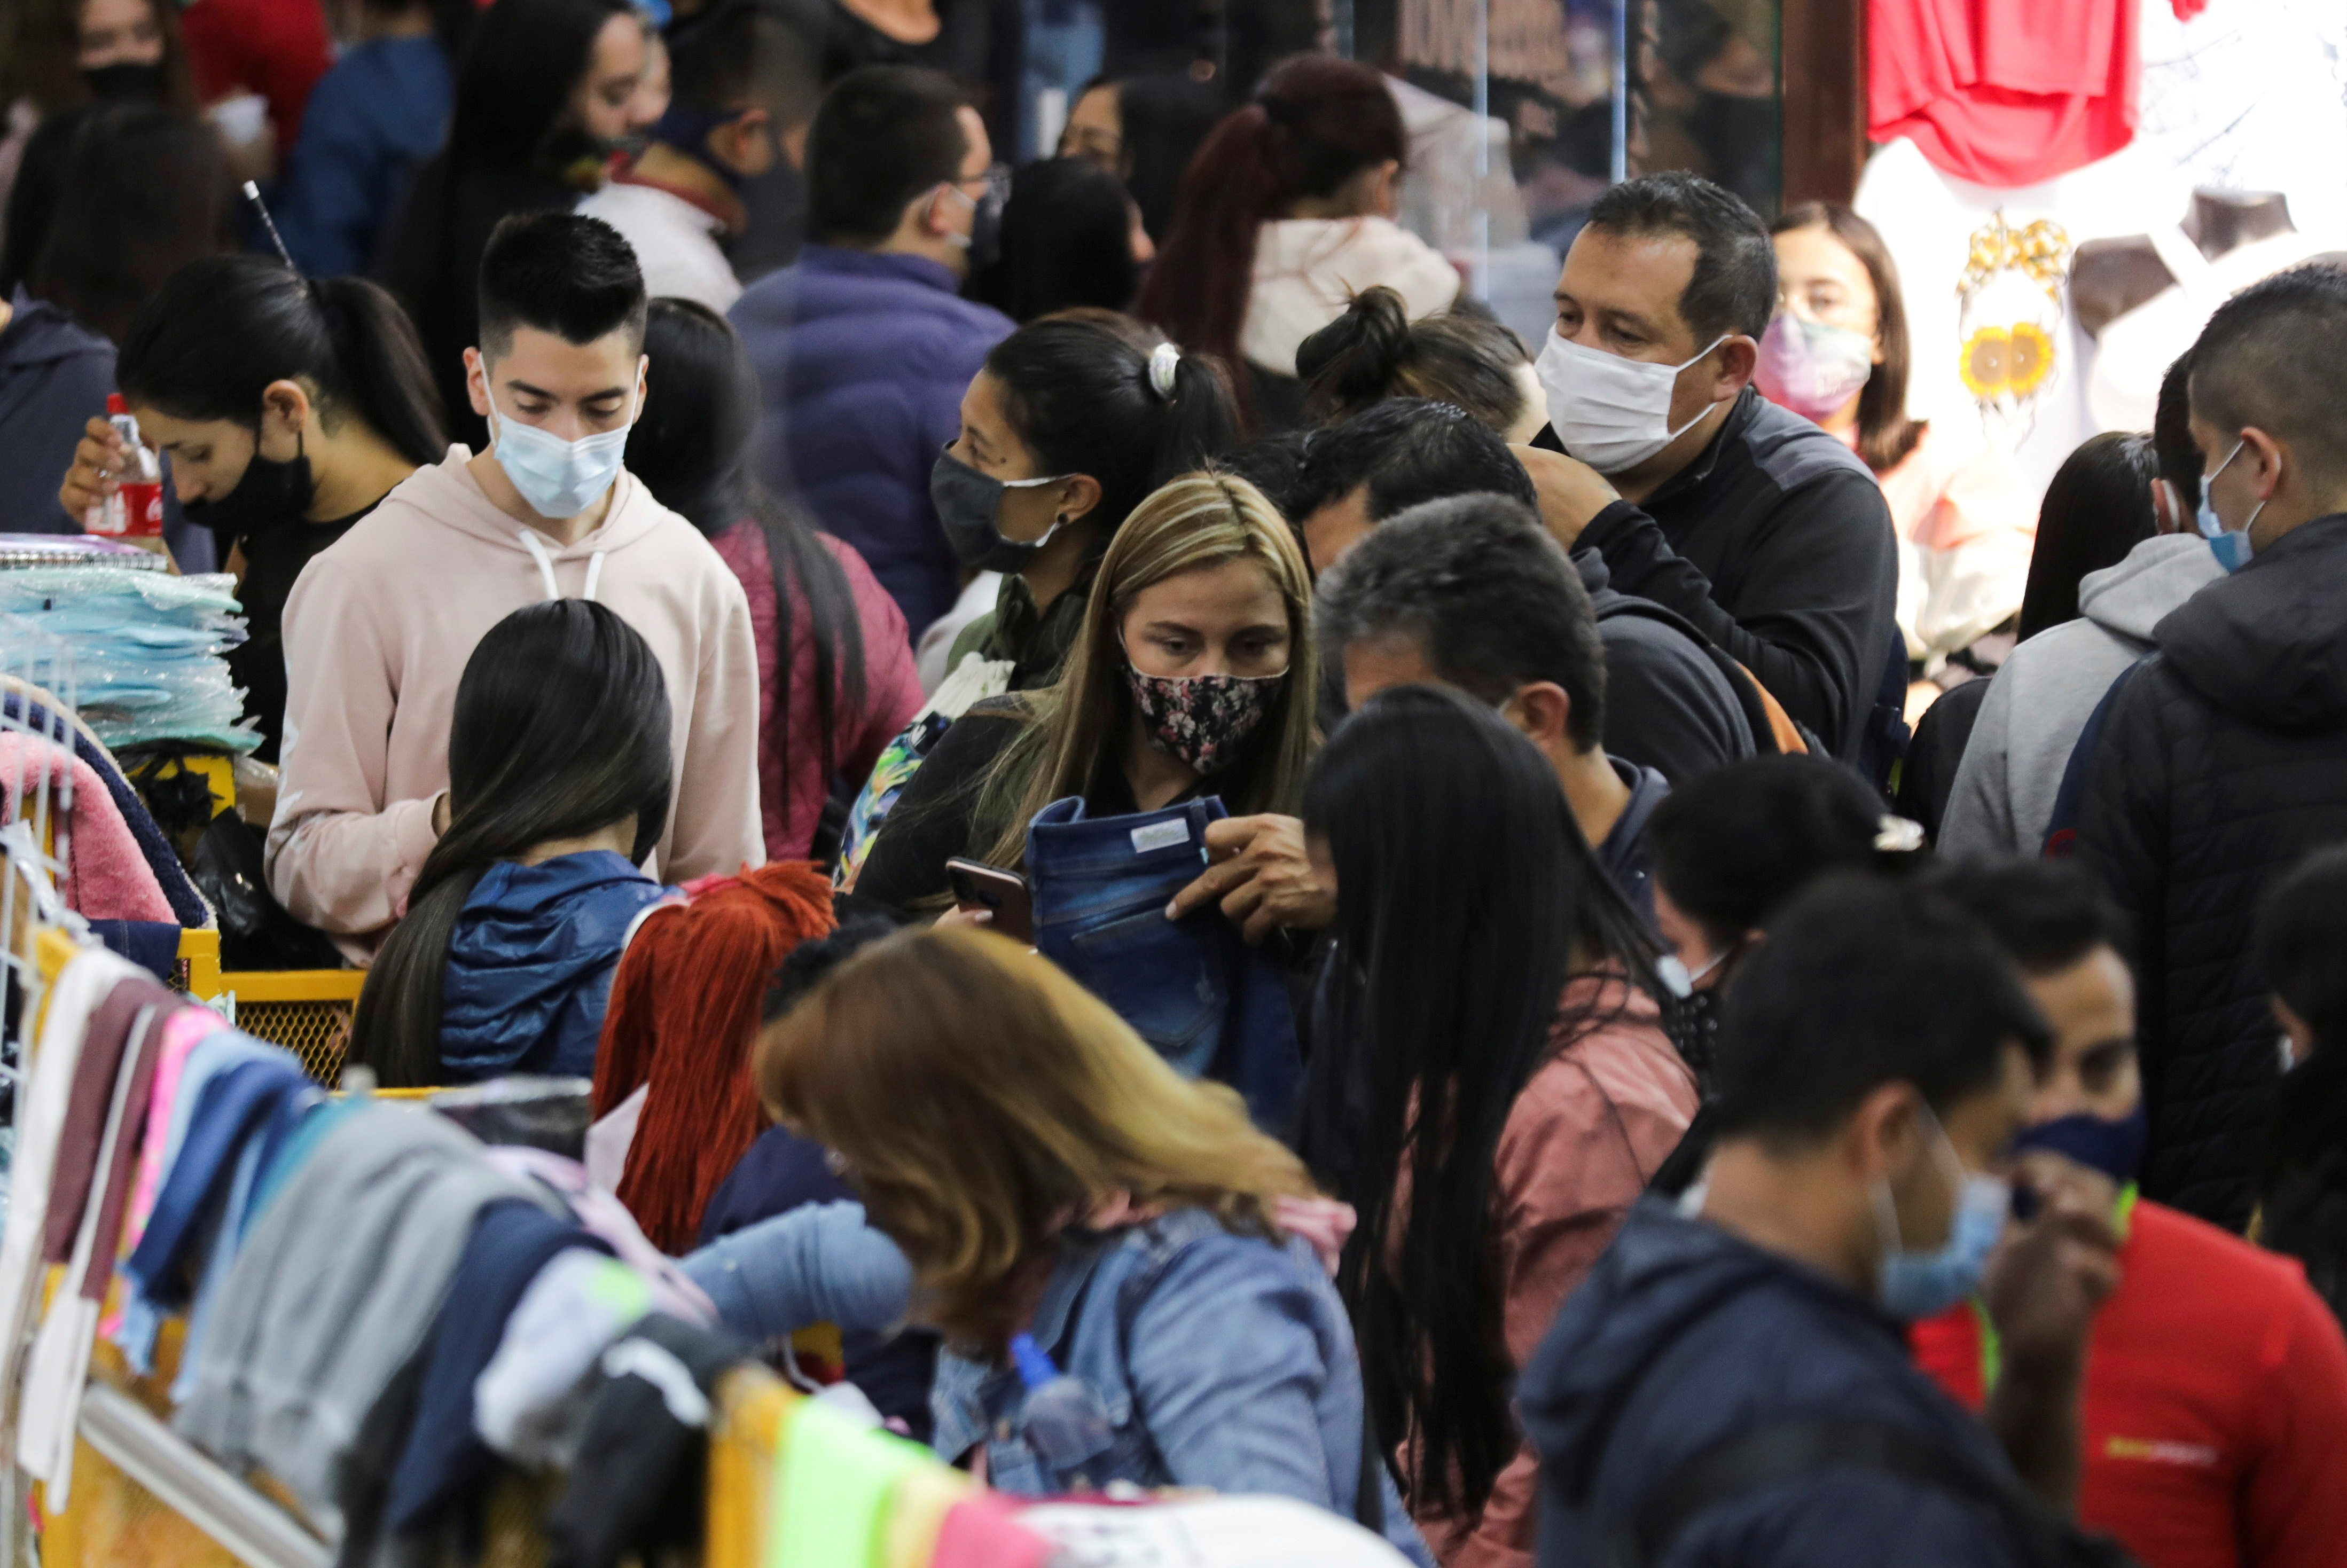 FILE PHOTO: People wearing face masks shop in the commercial sector of San Victorino during the Christmas sales season as the coronavirus disease (COVID-19) outbreak continues in Bogota, Colombia December 5, 2020. REUTERS/Luisa Gonzalez/File Photo